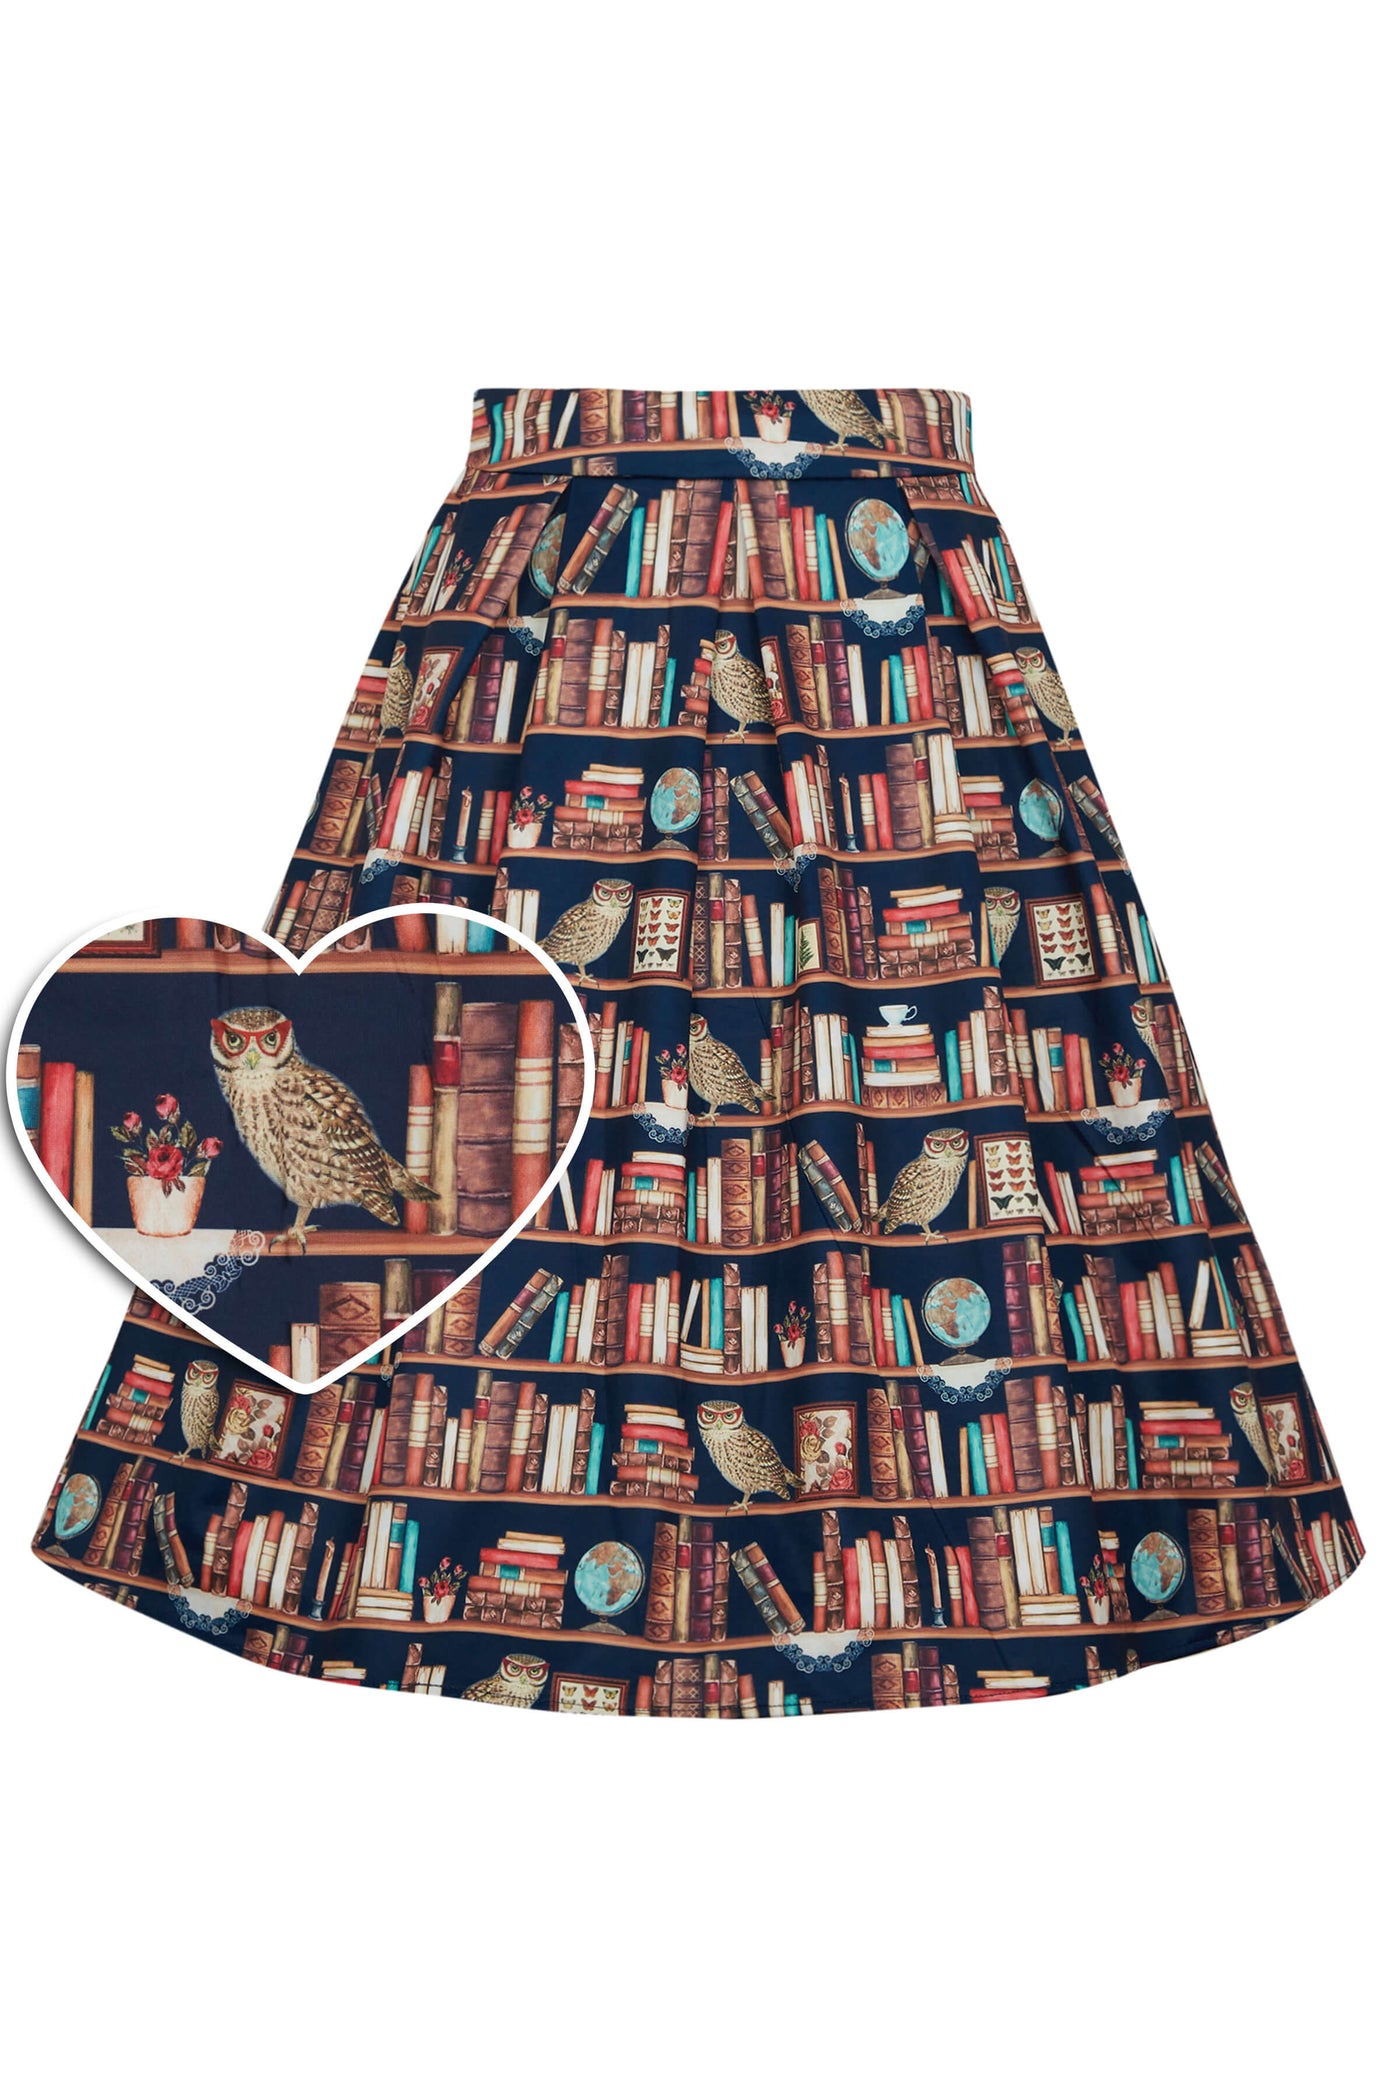 Vintage Inspired Book and Owl Print Skirt With Pockets front view